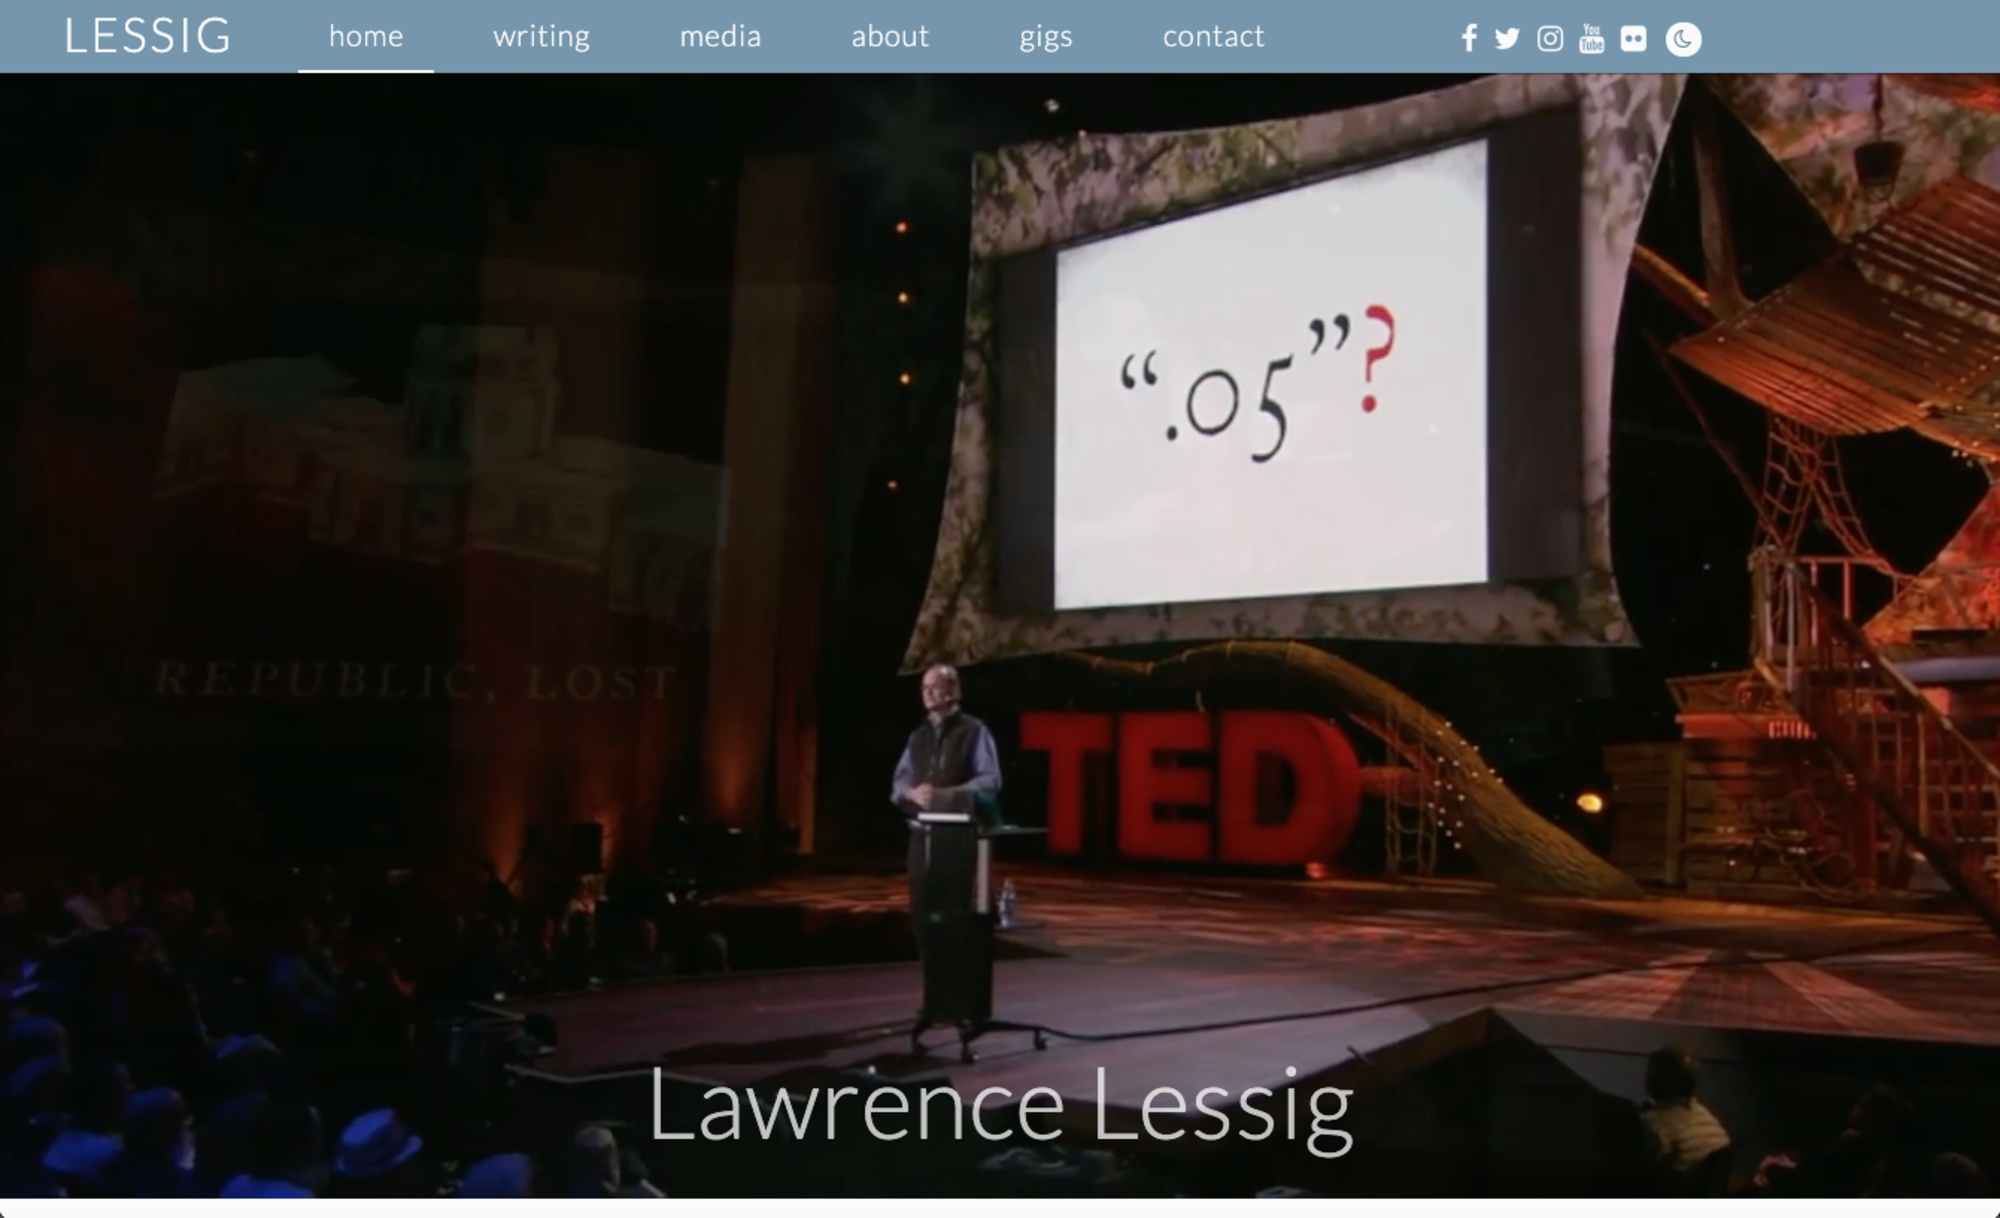 Lawrence Lessig homepage